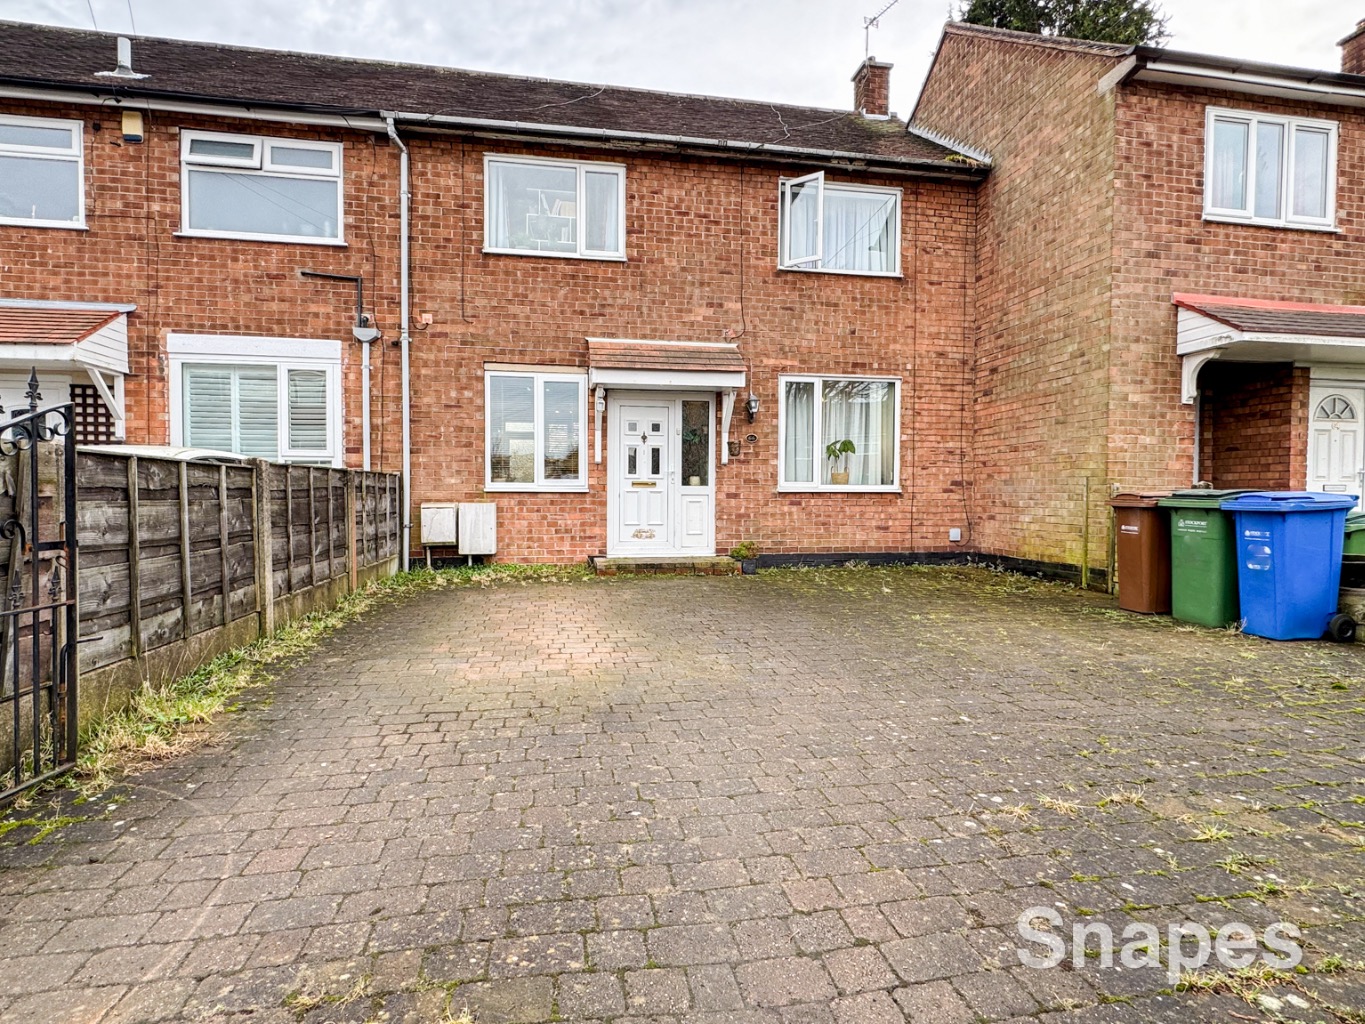 Images for North Park Road, Bramhall SK7 3LQ